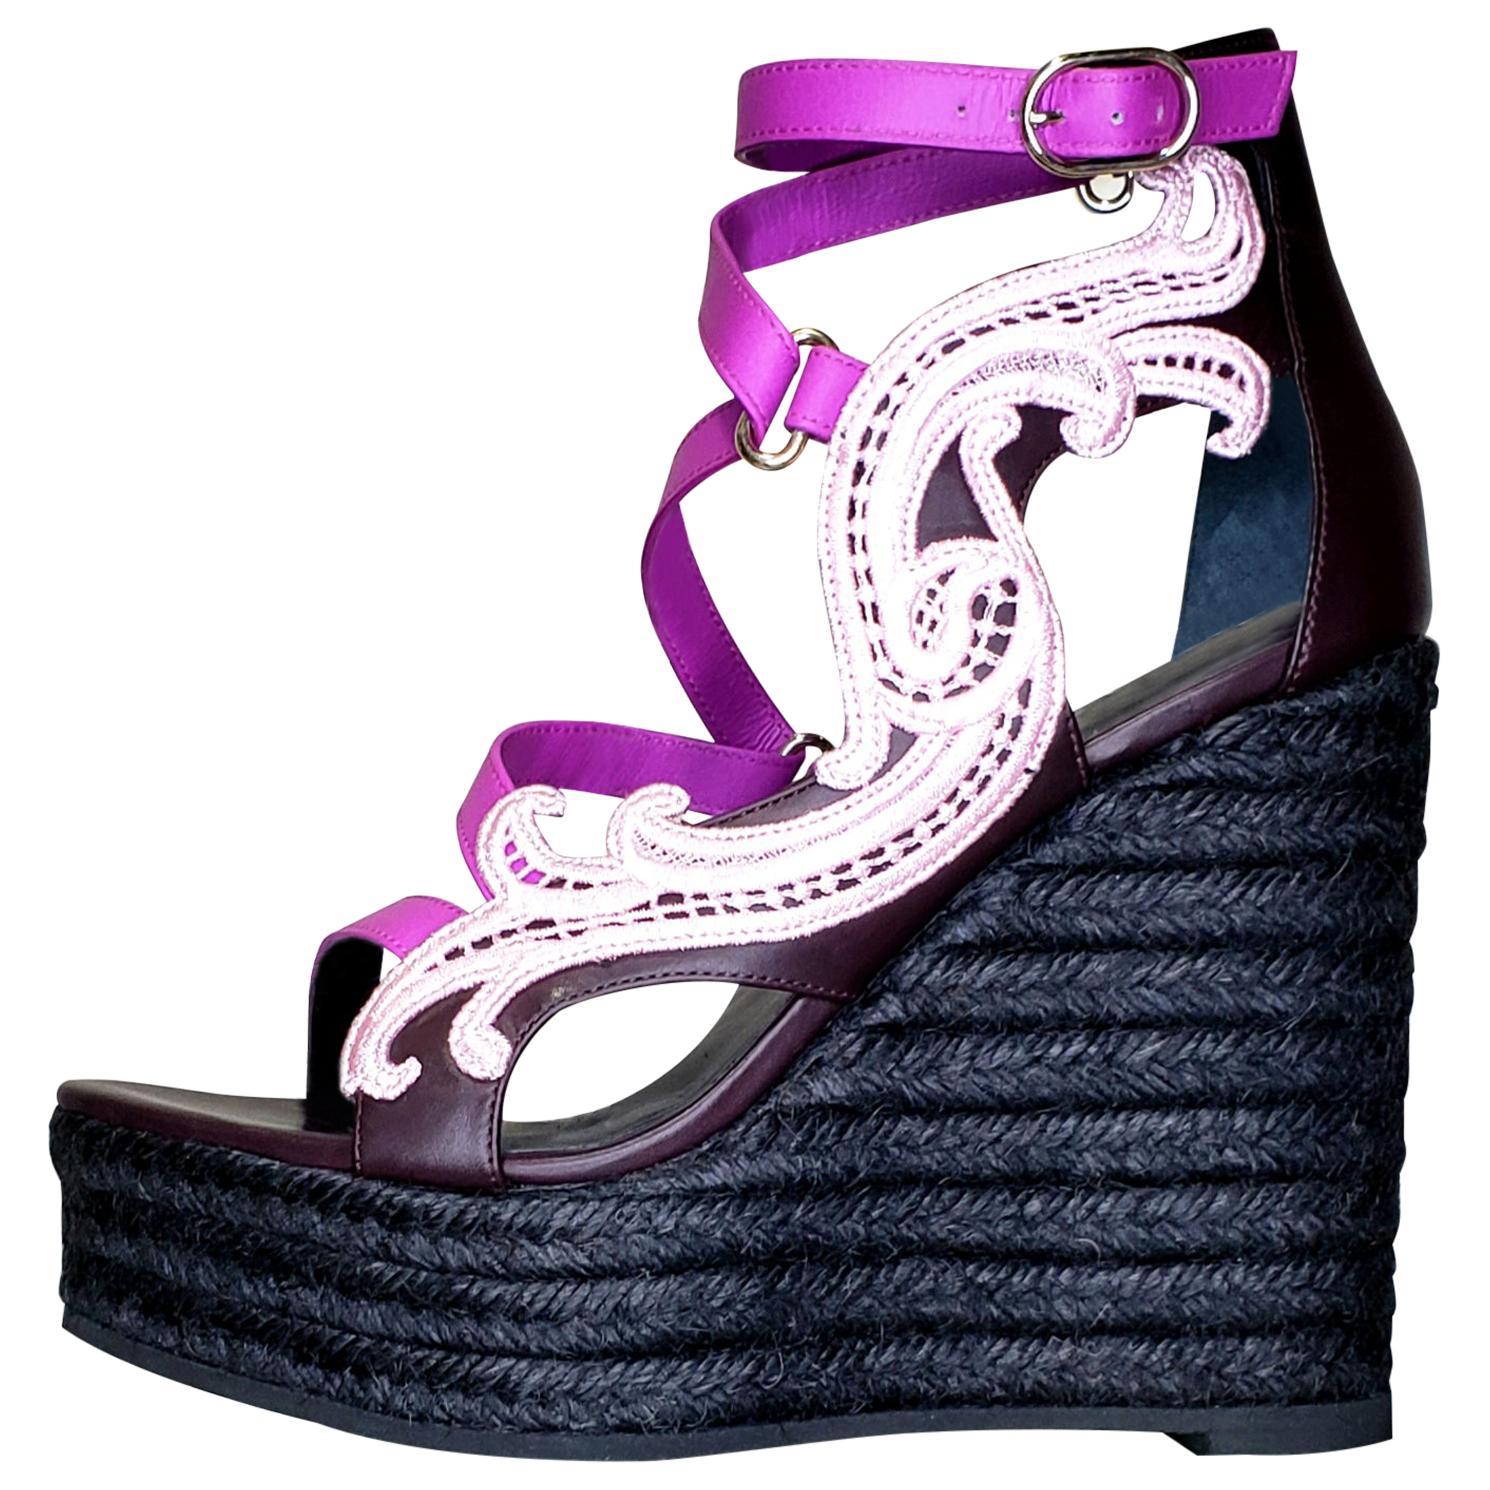 NEW VERSACE PURPLE LEATHER and PINK LACE WEDGE SANDALS 37, 37.5, 38.5 en vente